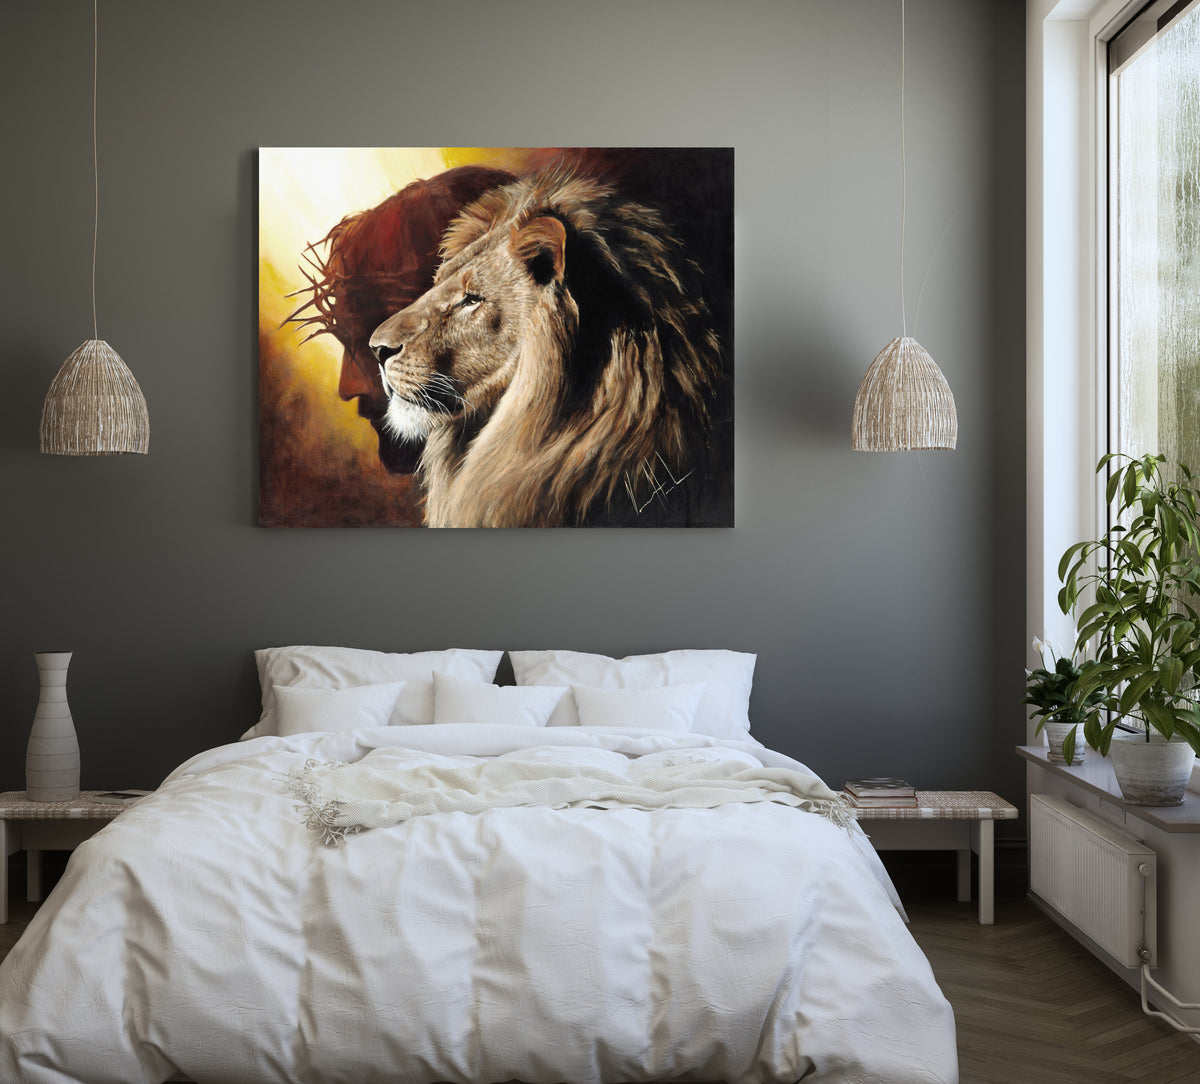 The Lion of Judah Painting hanging on a wall above a bed